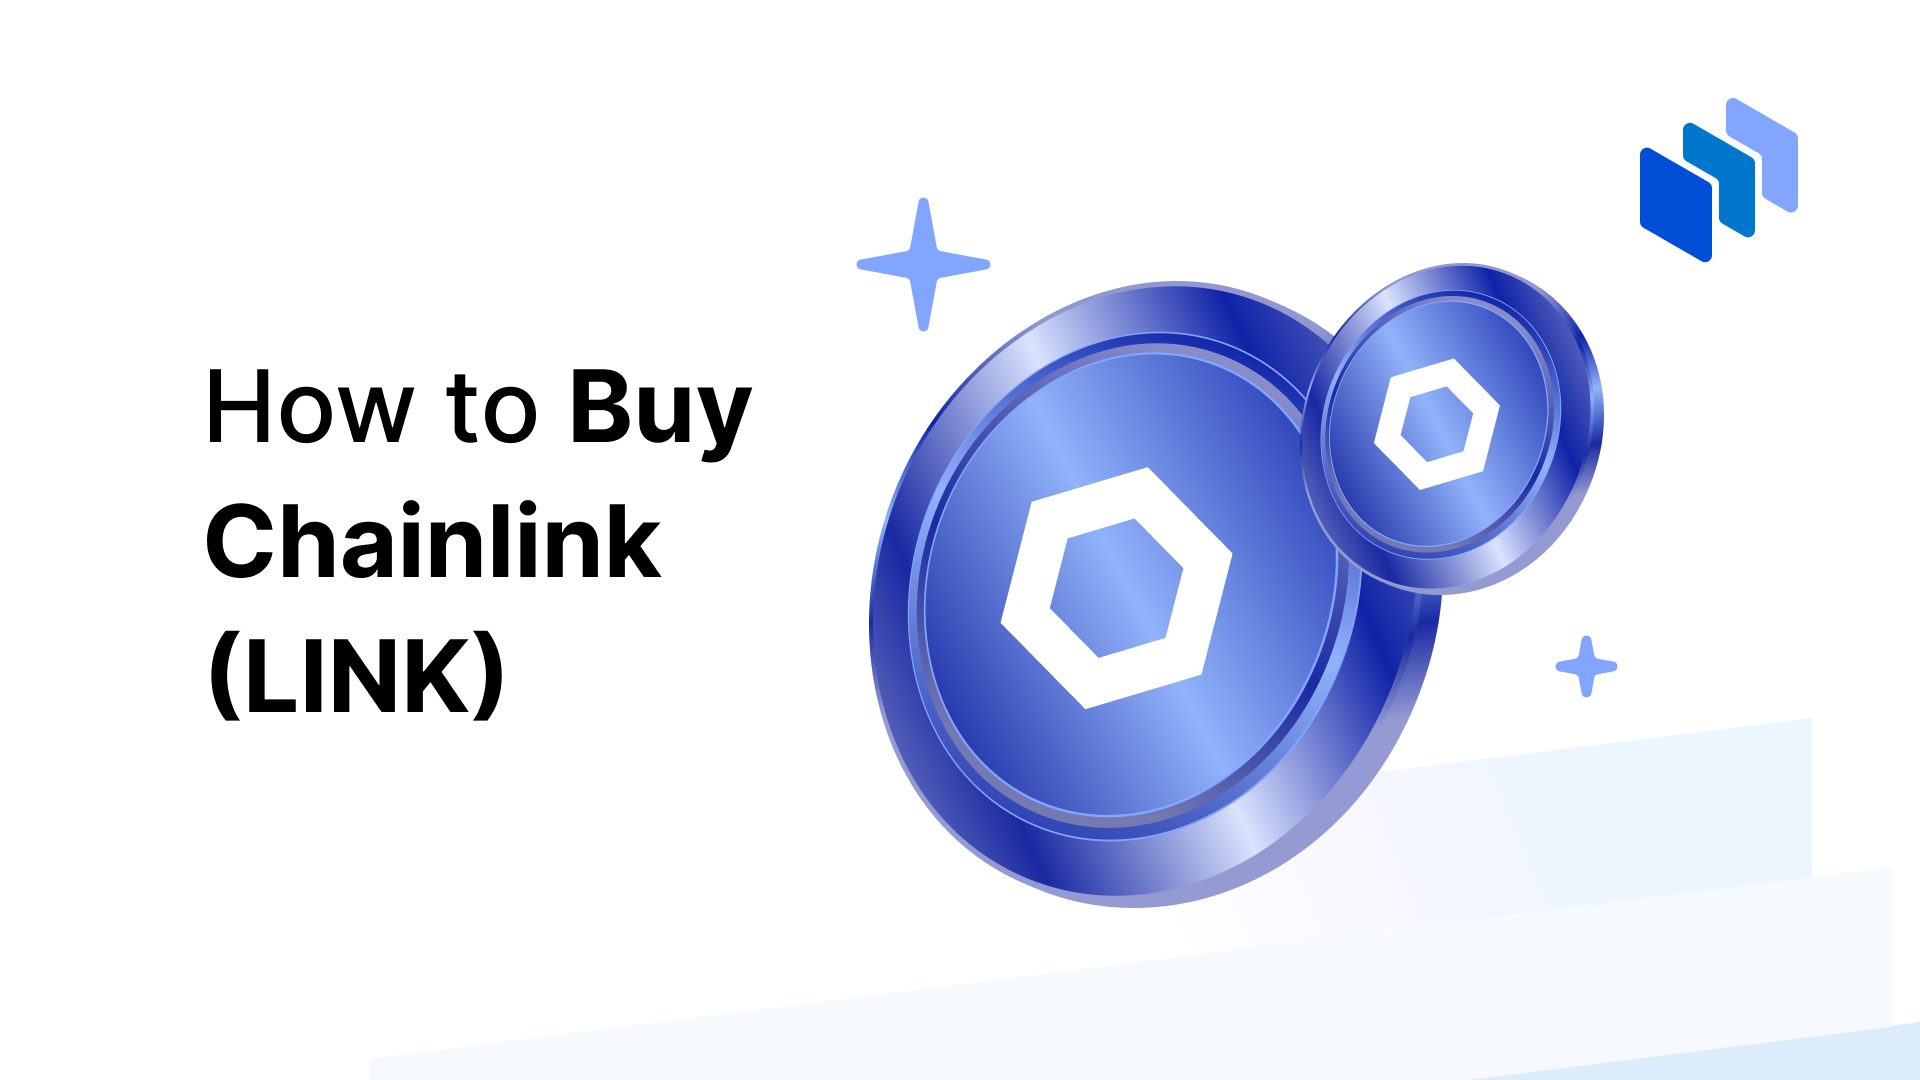 Chainlink crypto: How to buy, price, what it is - cryptolove.fun